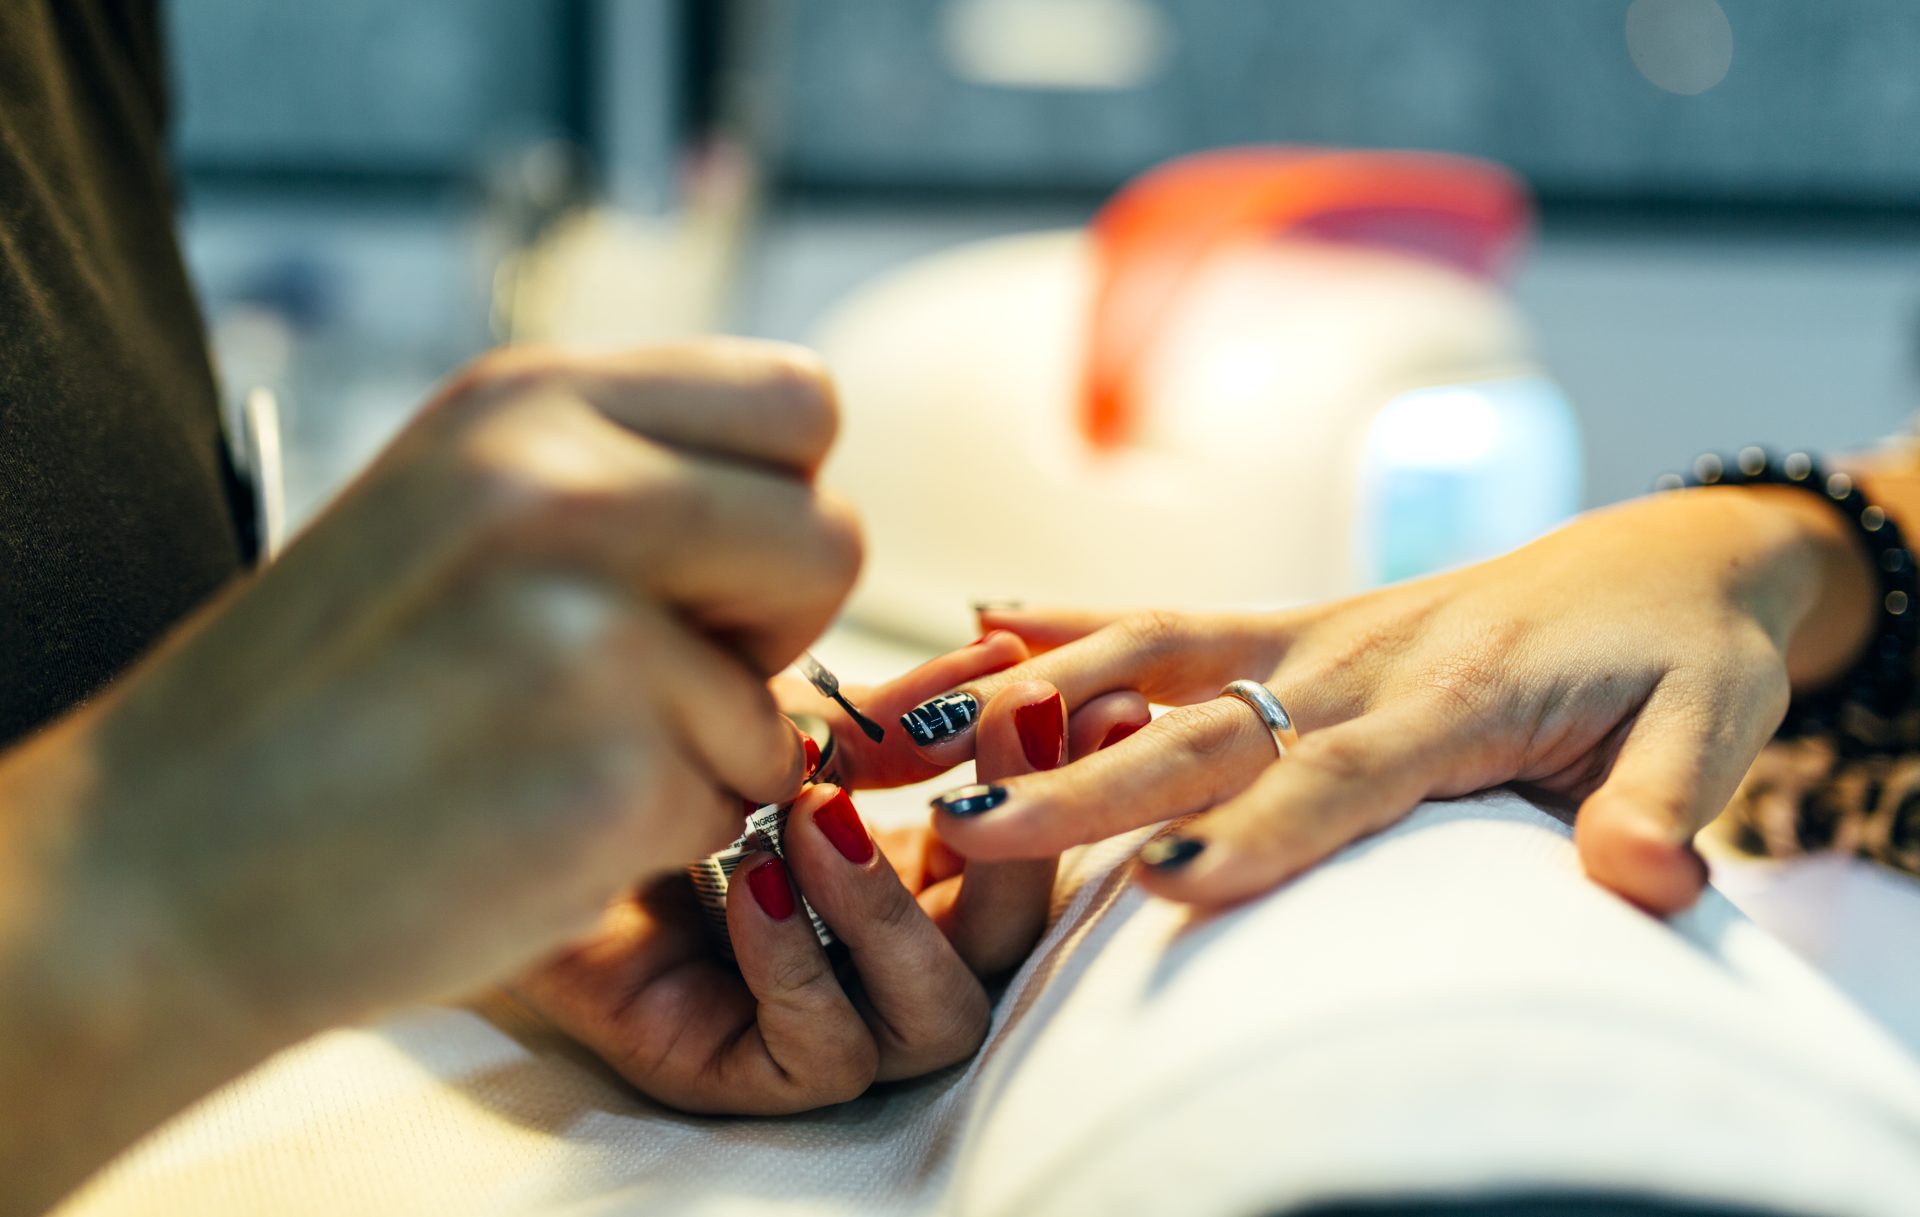 Nail Tech Goes Viral For Refusing Designs Deemed UnChristian scaled